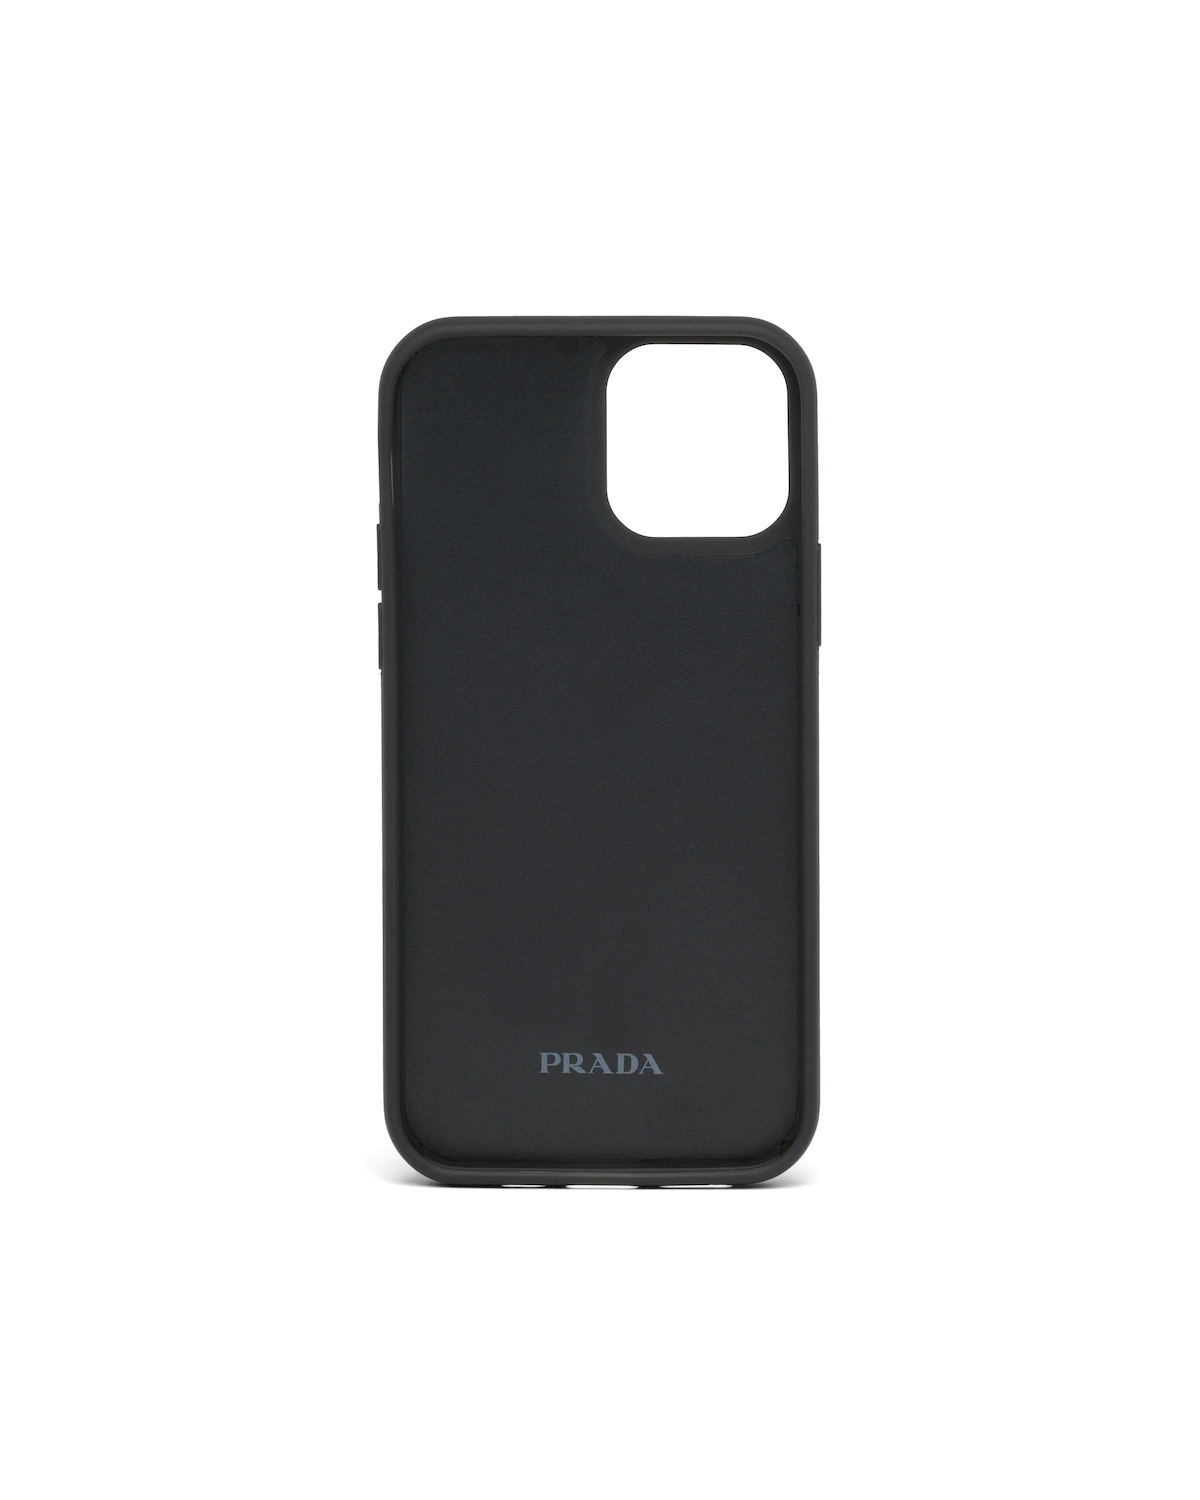 Saffiano cover for iPhone 12 and 12 Pro - 3